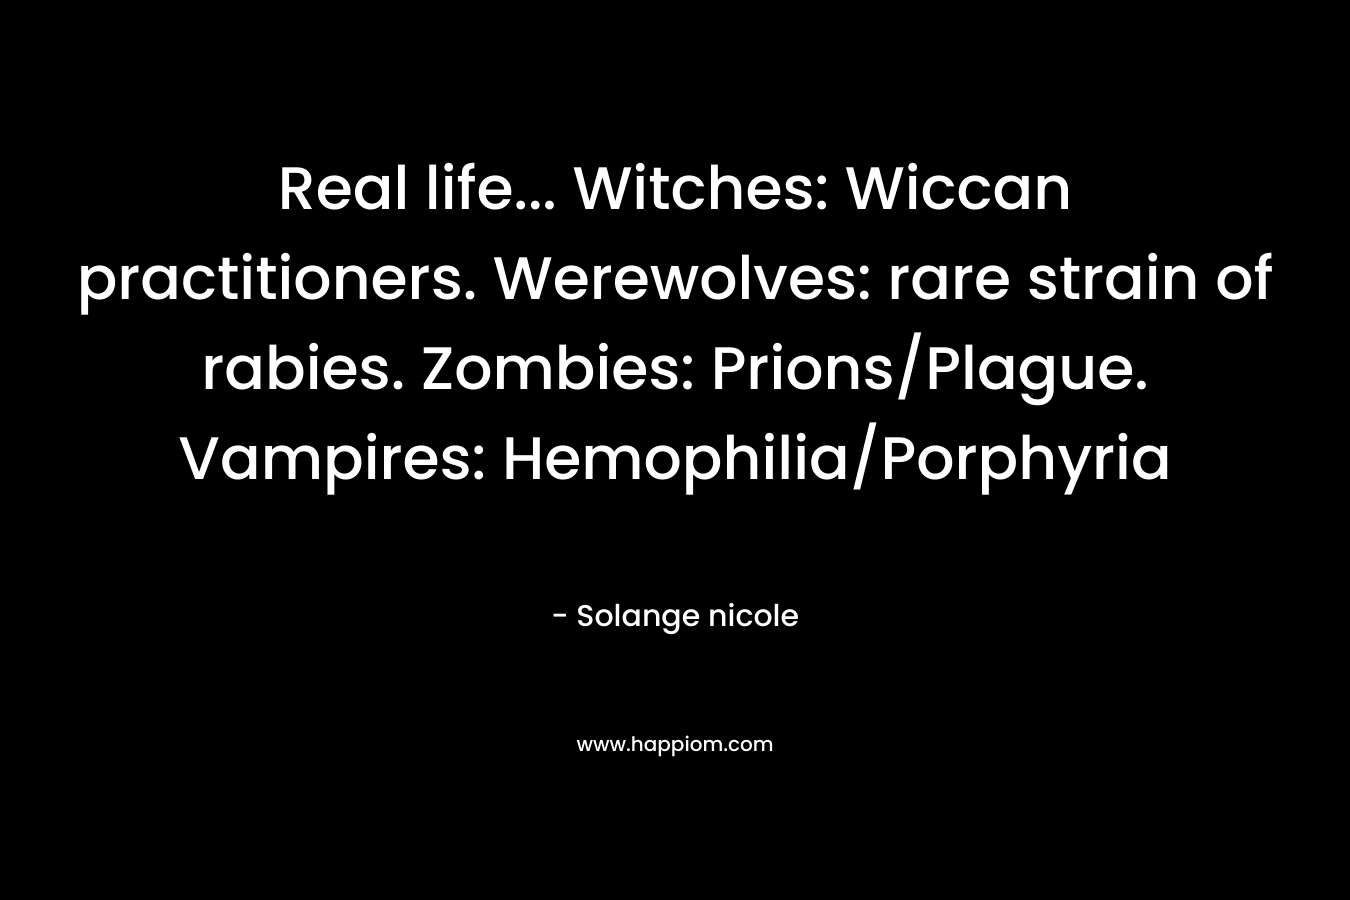 Real life... Witches: Wiccan practitioners. Werewolves: rare strain of rabies. Zombies: Prions/Plague. Vampires: Hemophilia/Porphyria